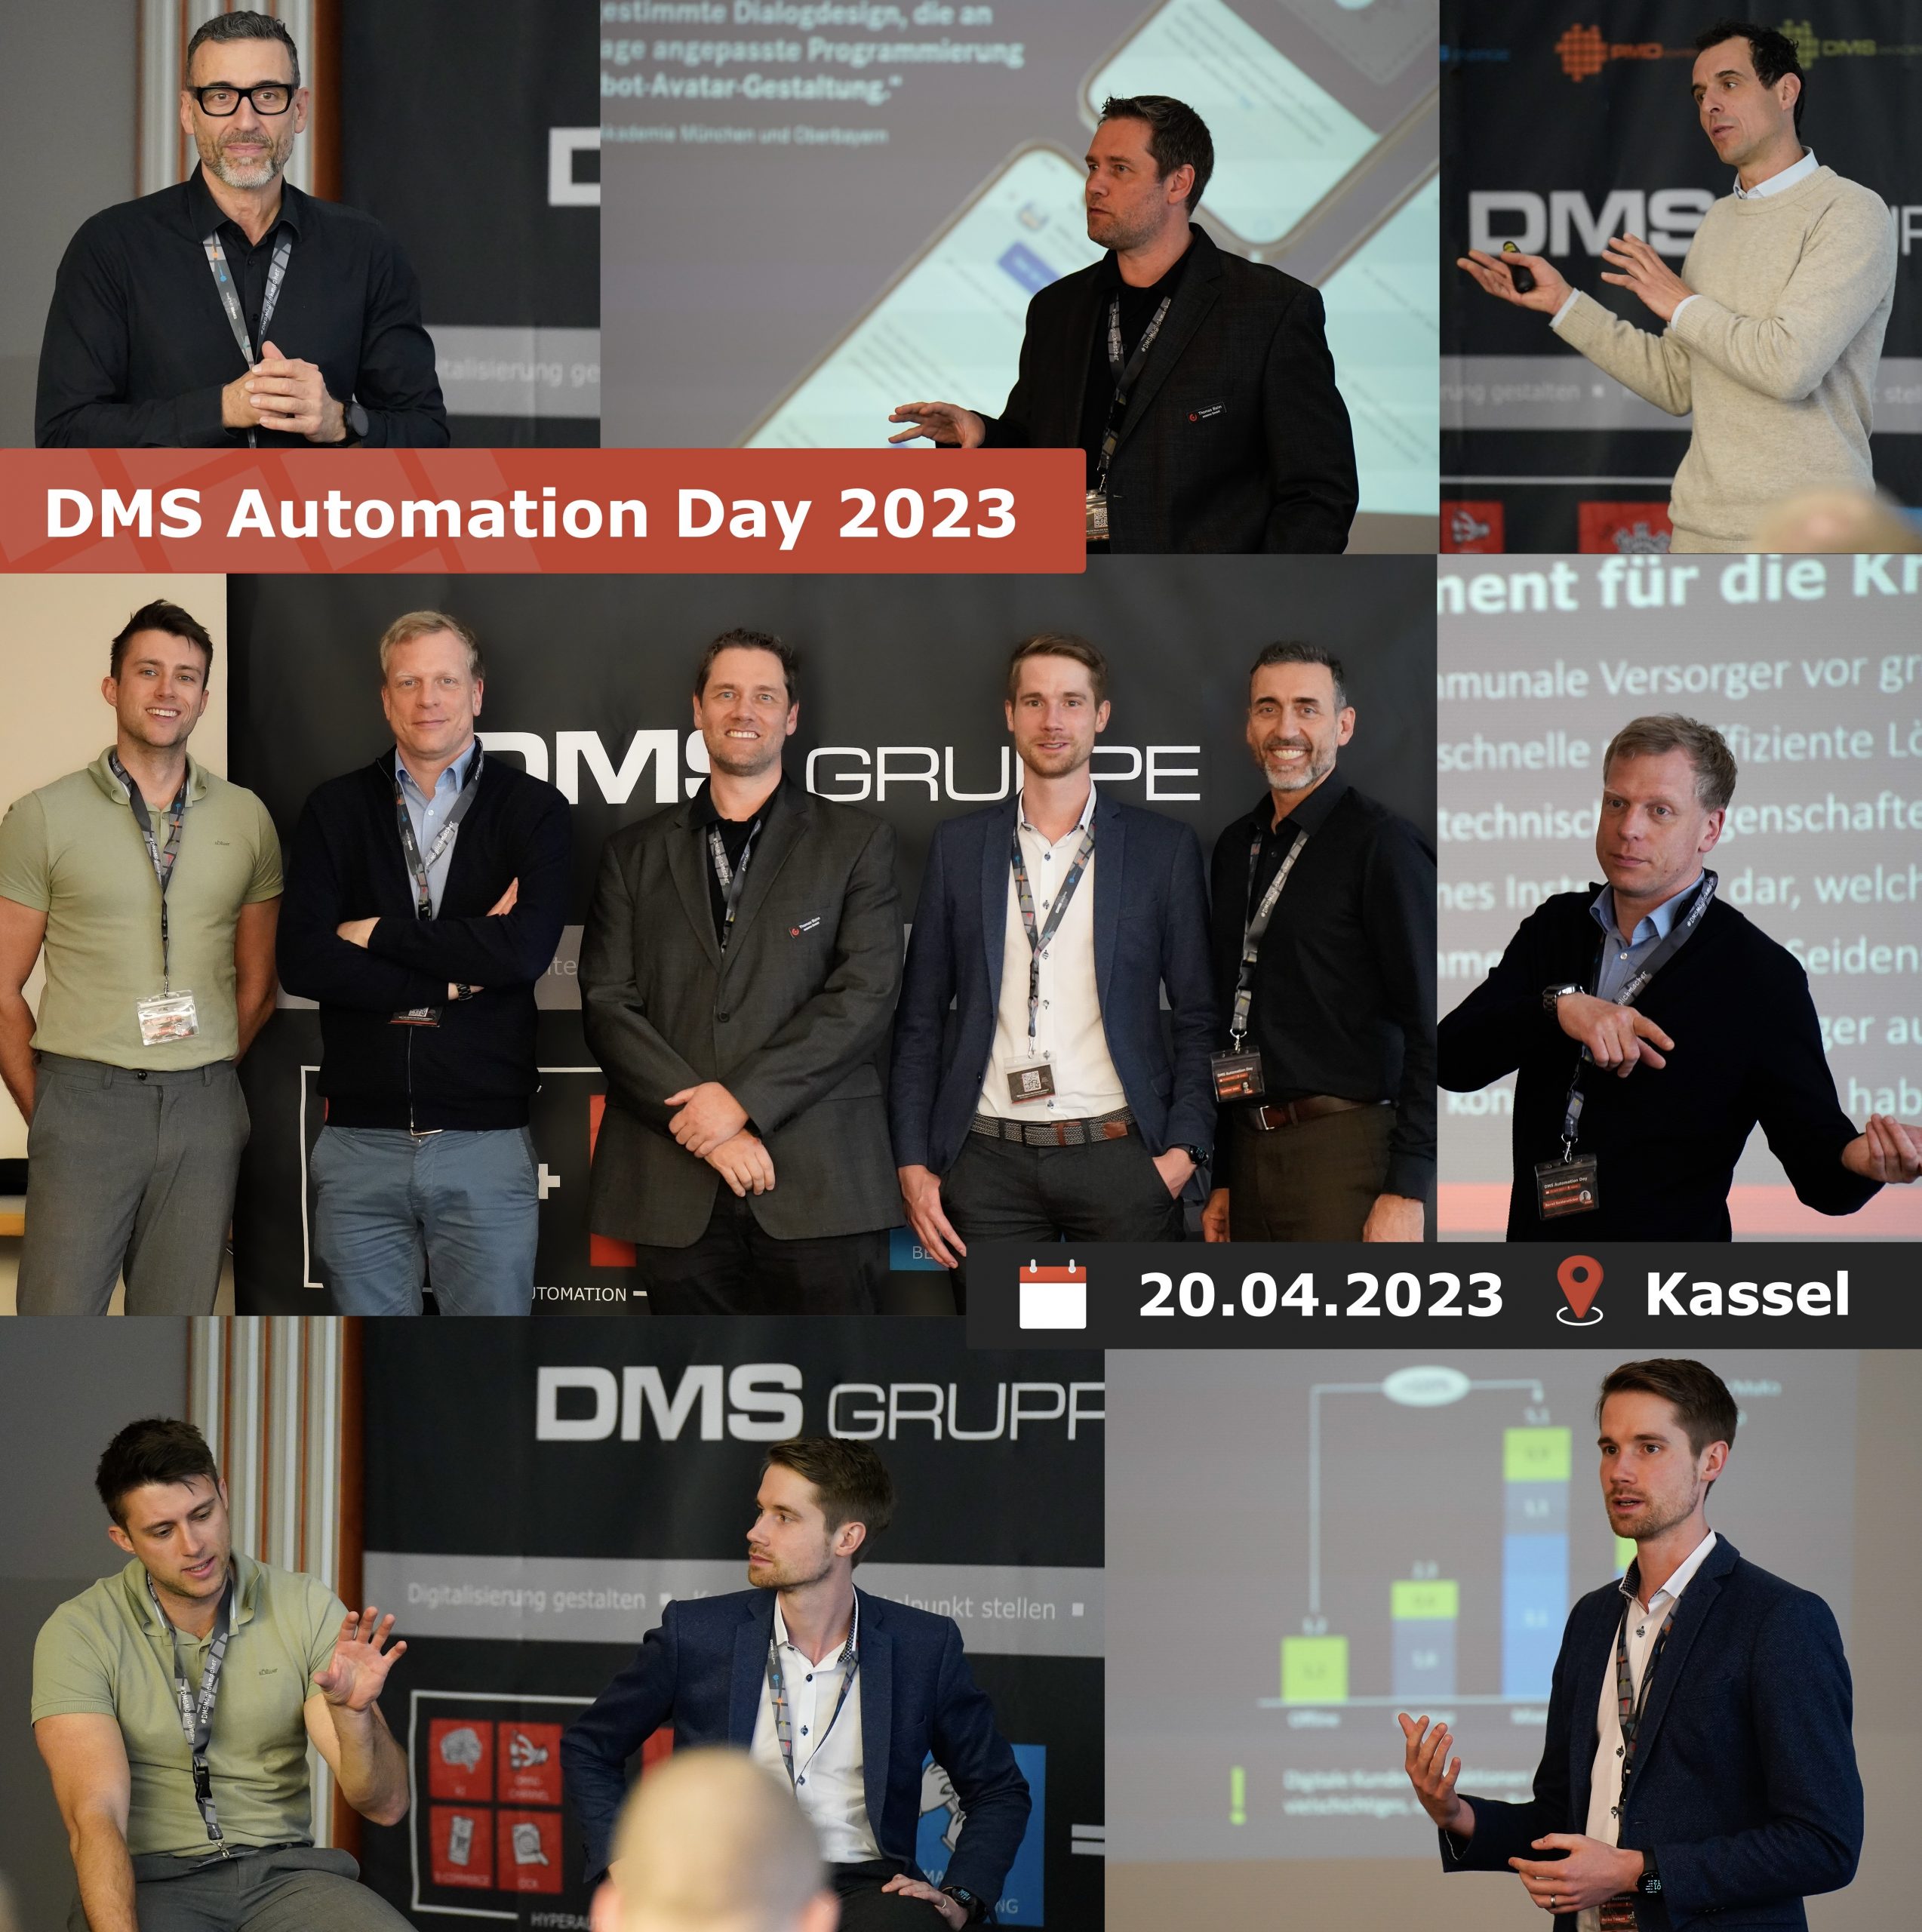 DMS Automation Day 2023